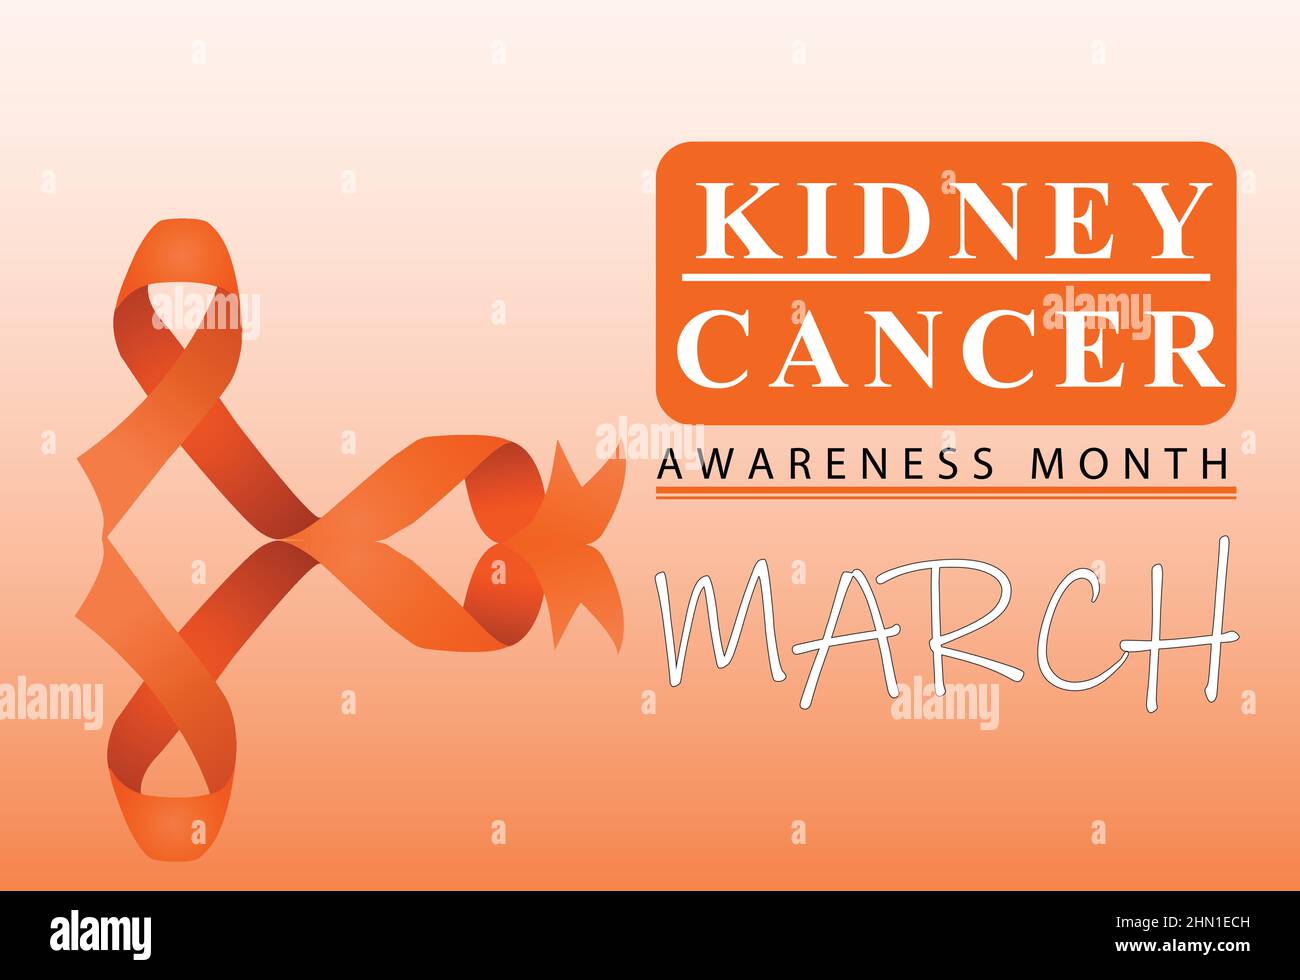 Medical Poster Or Banner Vector Design Of Kidney Cancer Awareness Month March Stock Vector